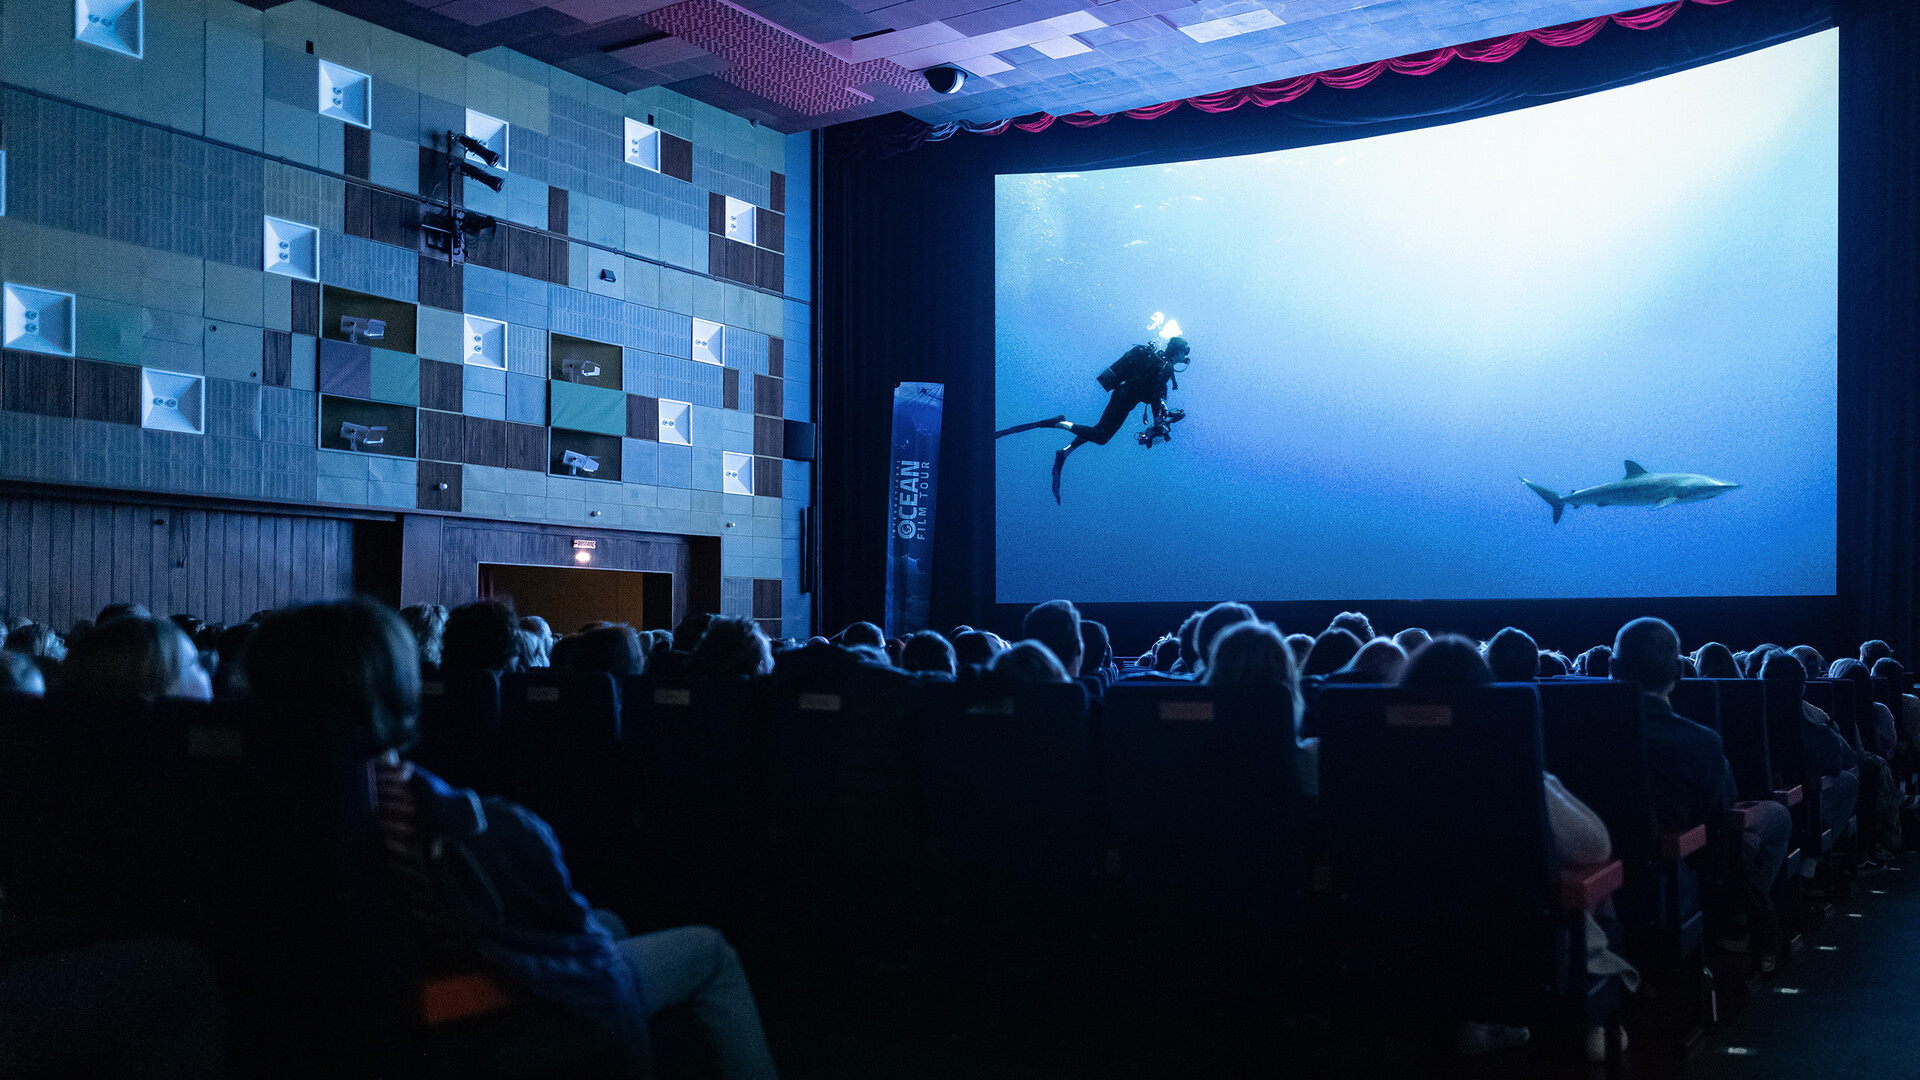 Room with an audience and a large screen showing a diver and a shark